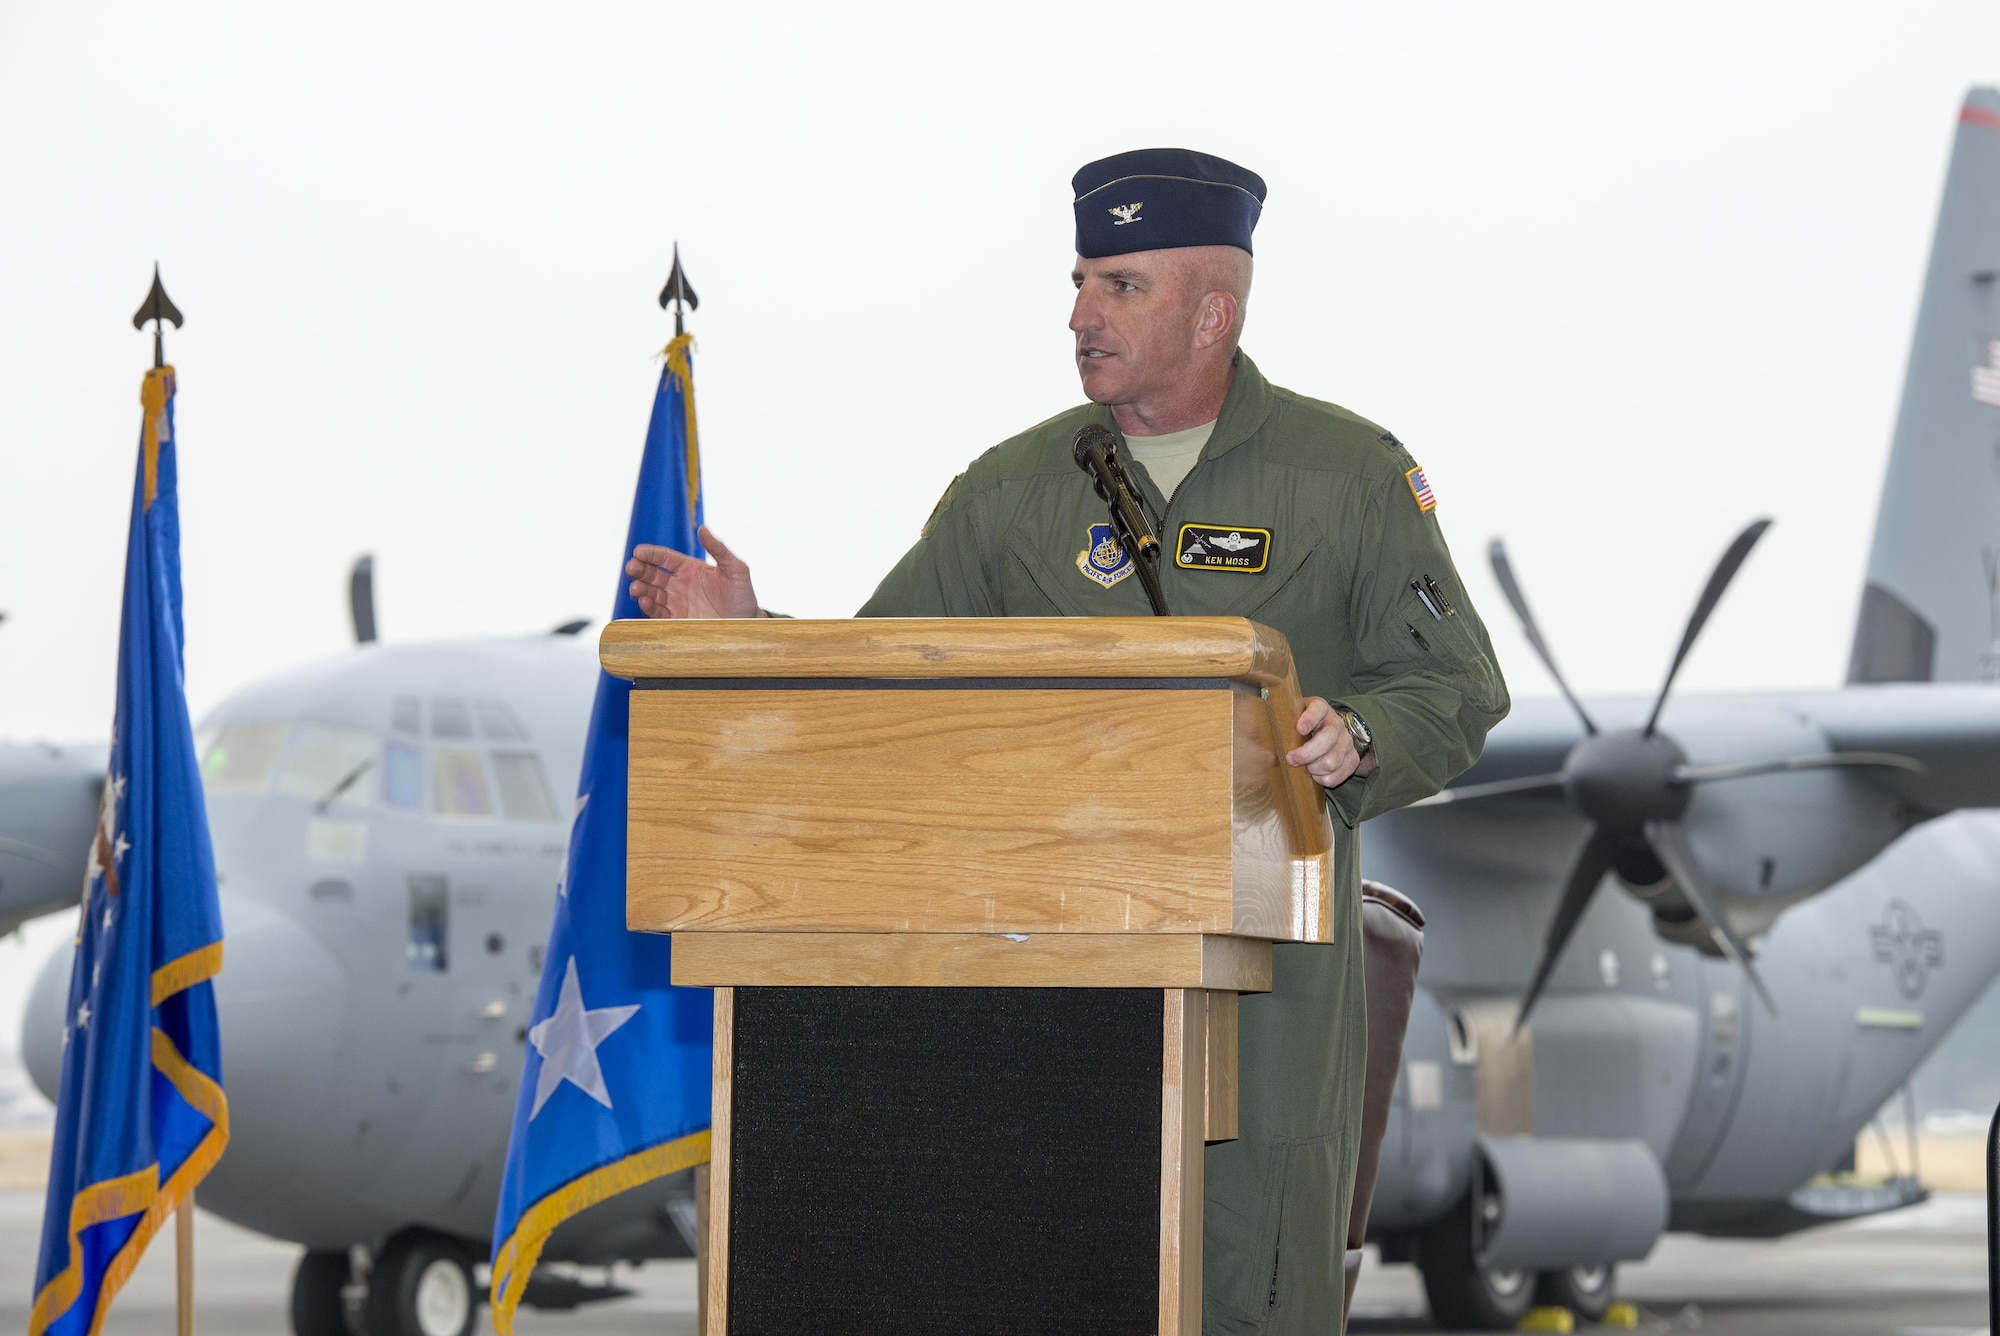 Col. Kenneth Moss, 374th Airlift Wing commander, gives closing remarks during a ceremony held to celebrate the arrival of the first C-130J Super Hercules assigned to Yokota Air Base, Japan, Mar. 6, 2017. The C-130Js will be used to support critical peacekeeping and contingency operations throughout the Indo-Asia Pacific region, including cargo delivery, troop transport, airdrop and aeromedical missions. (U.S. Air Force photo by Senior Airman David C. Danford)